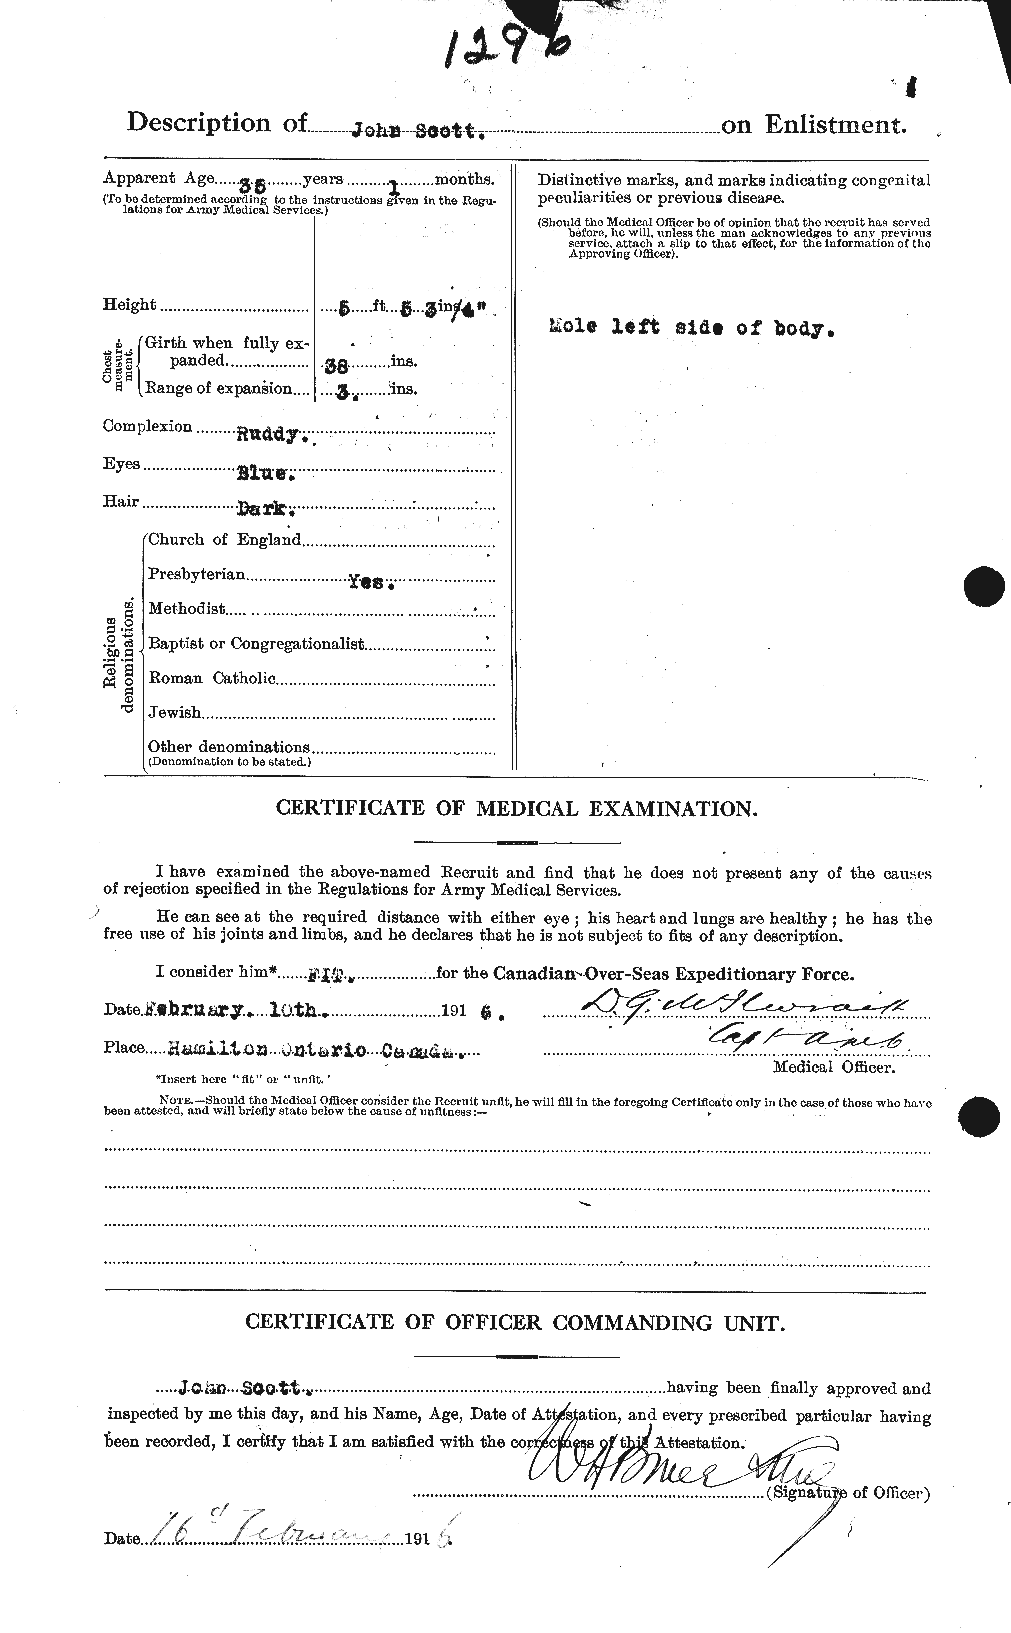 Personnel Records of the First World War - CEF 084939b